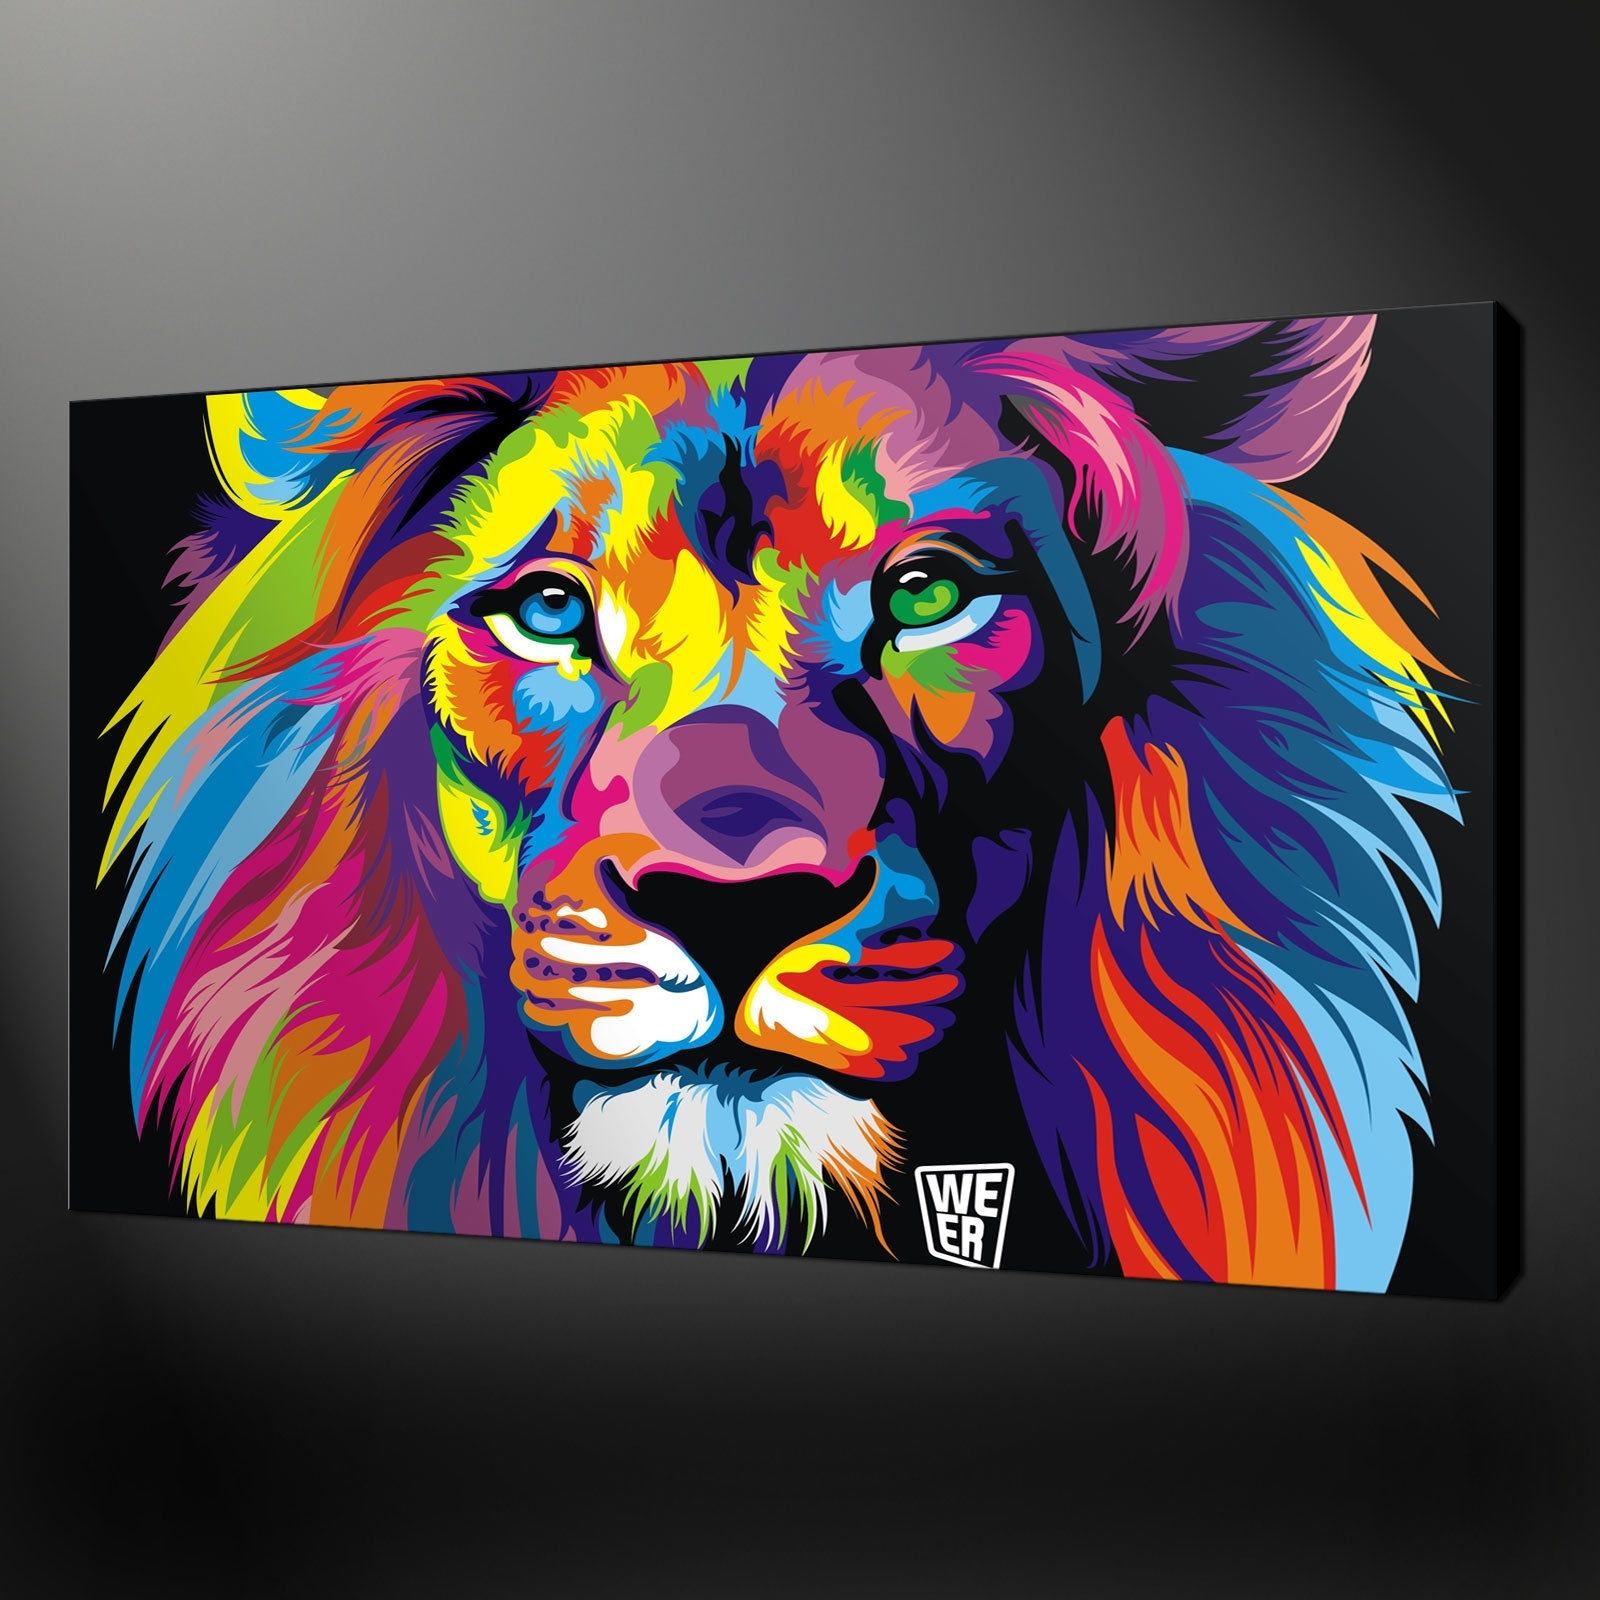 Abstract Lion Quality Canvas Print Picture Wall Art Design Free Uk For Recent Abstract Animal Wall Art (View 1 of 20)